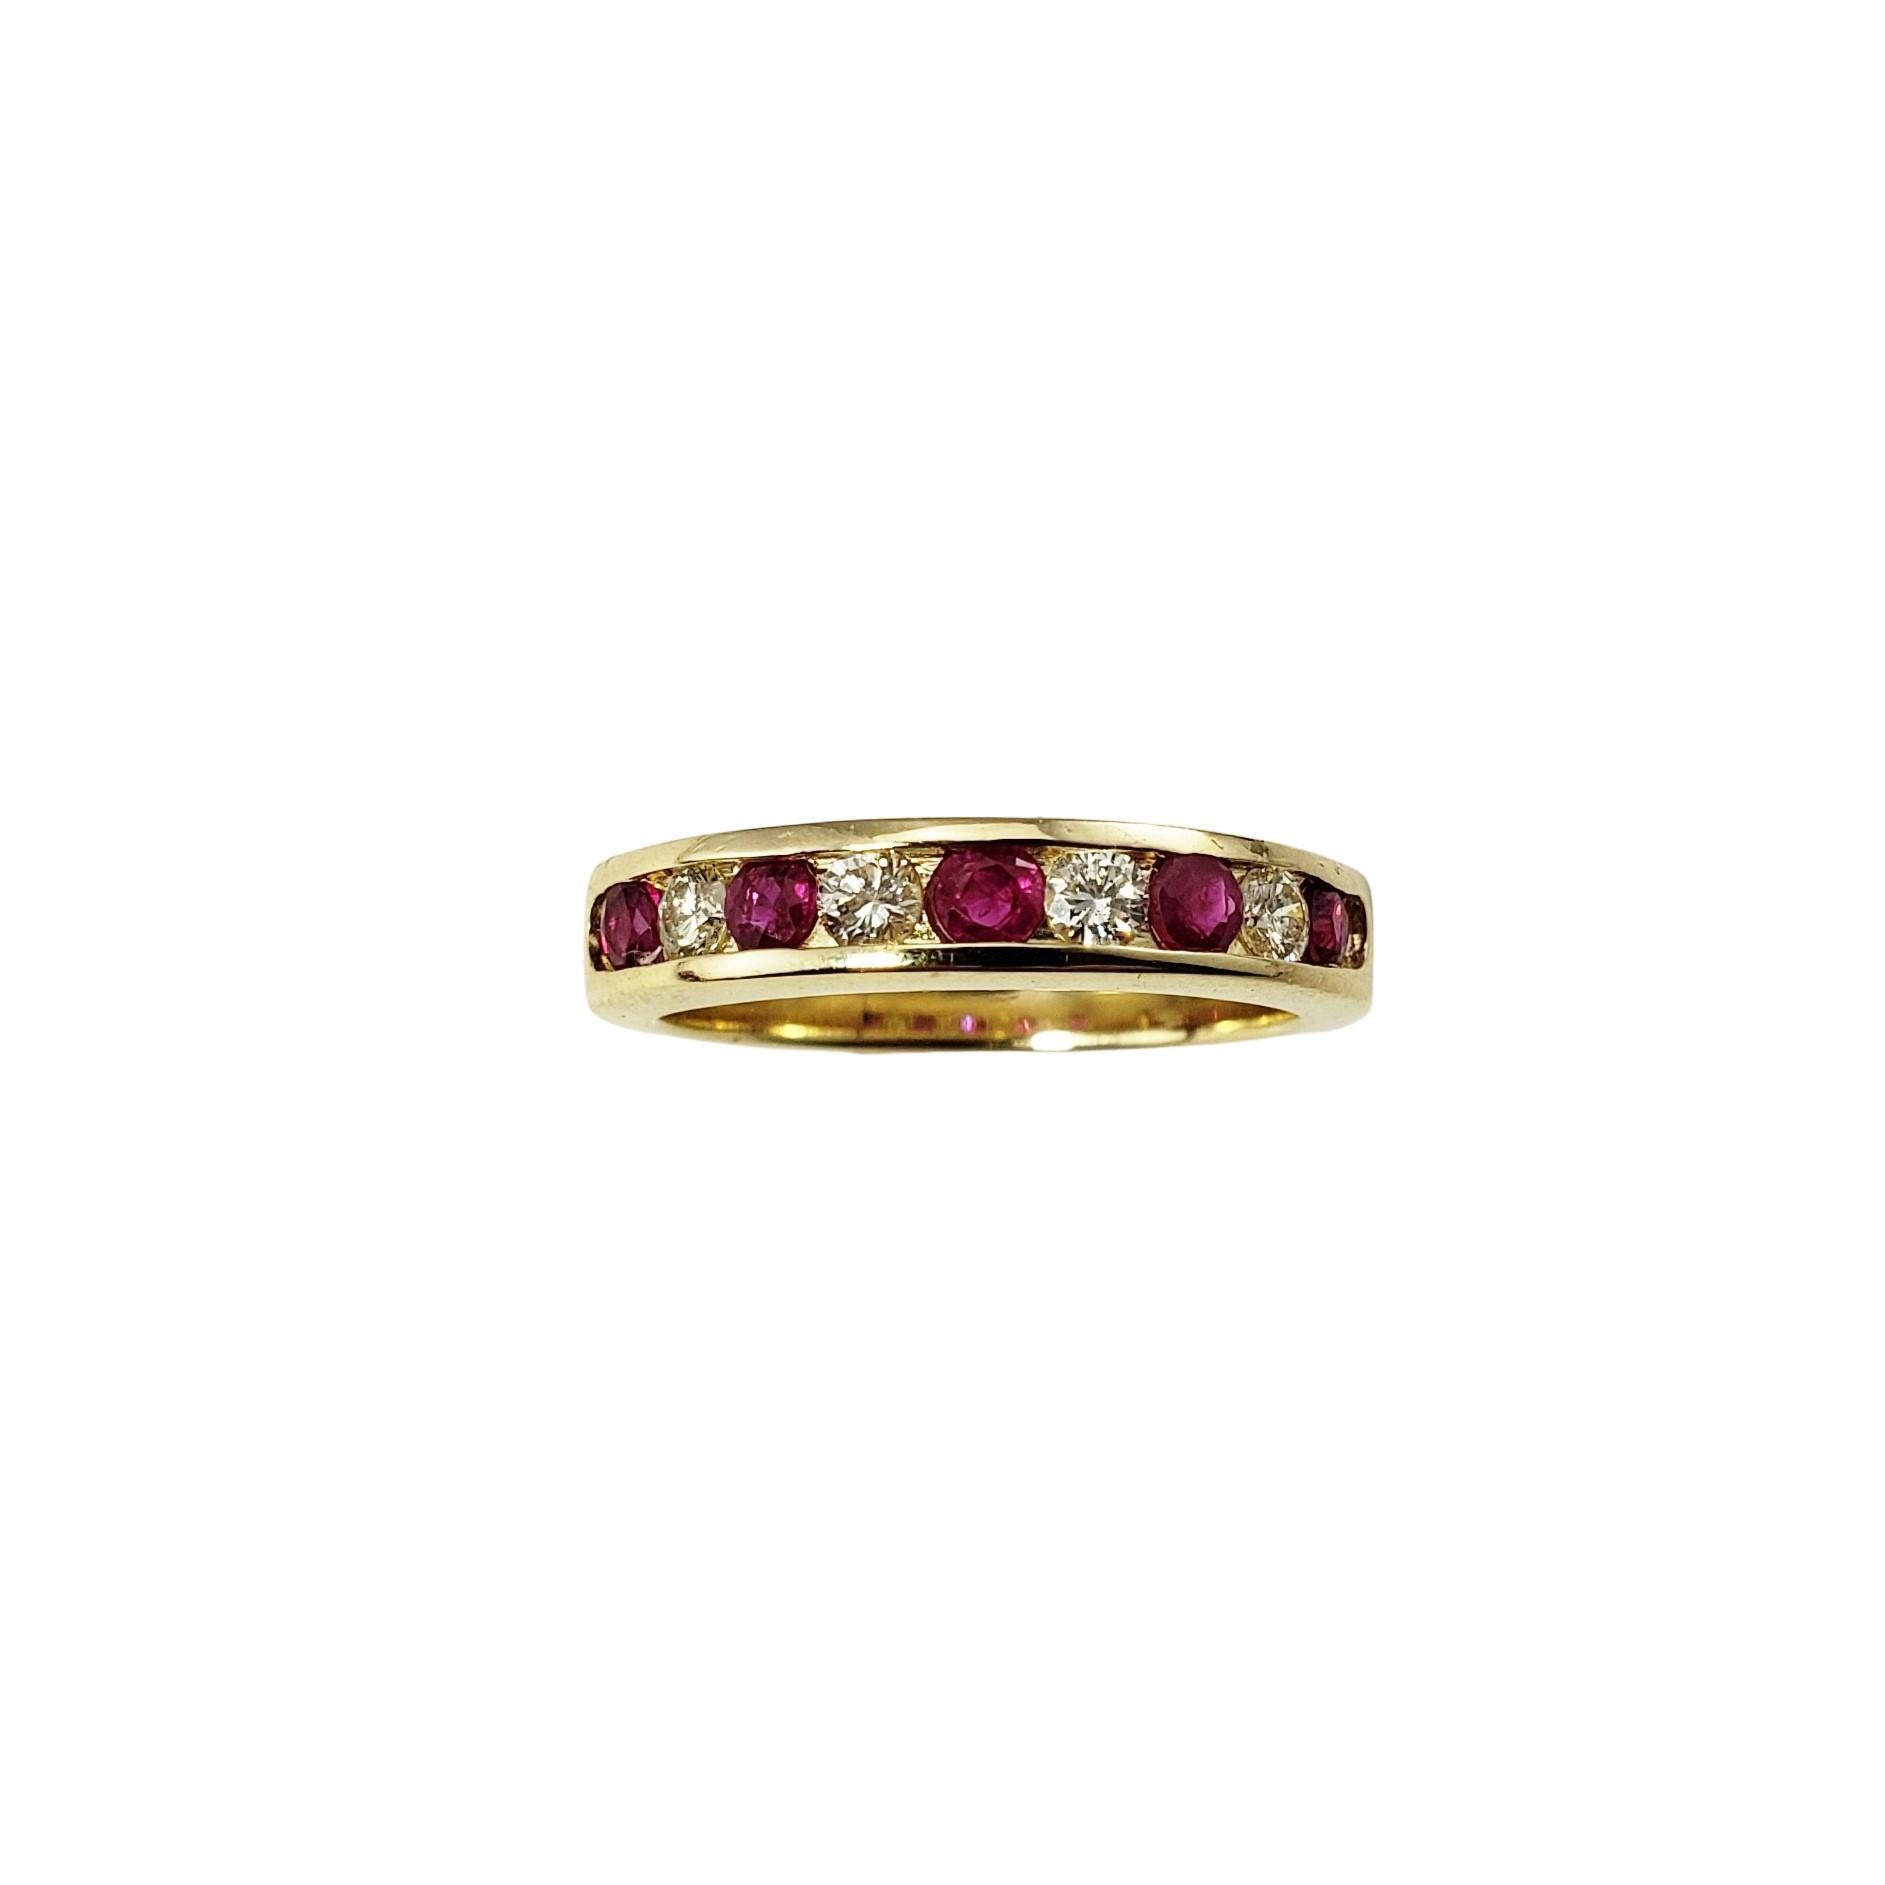 Vintage 14 Karat Yellow Gold Lab Created Ruby and Diamond Band Ring Size 6.5-

This lovely band features four oval lab created rubies and four round brilliant cut diamonds set in classic 14K yellow gold.  Width:  4 mm.

Approximate total diamond